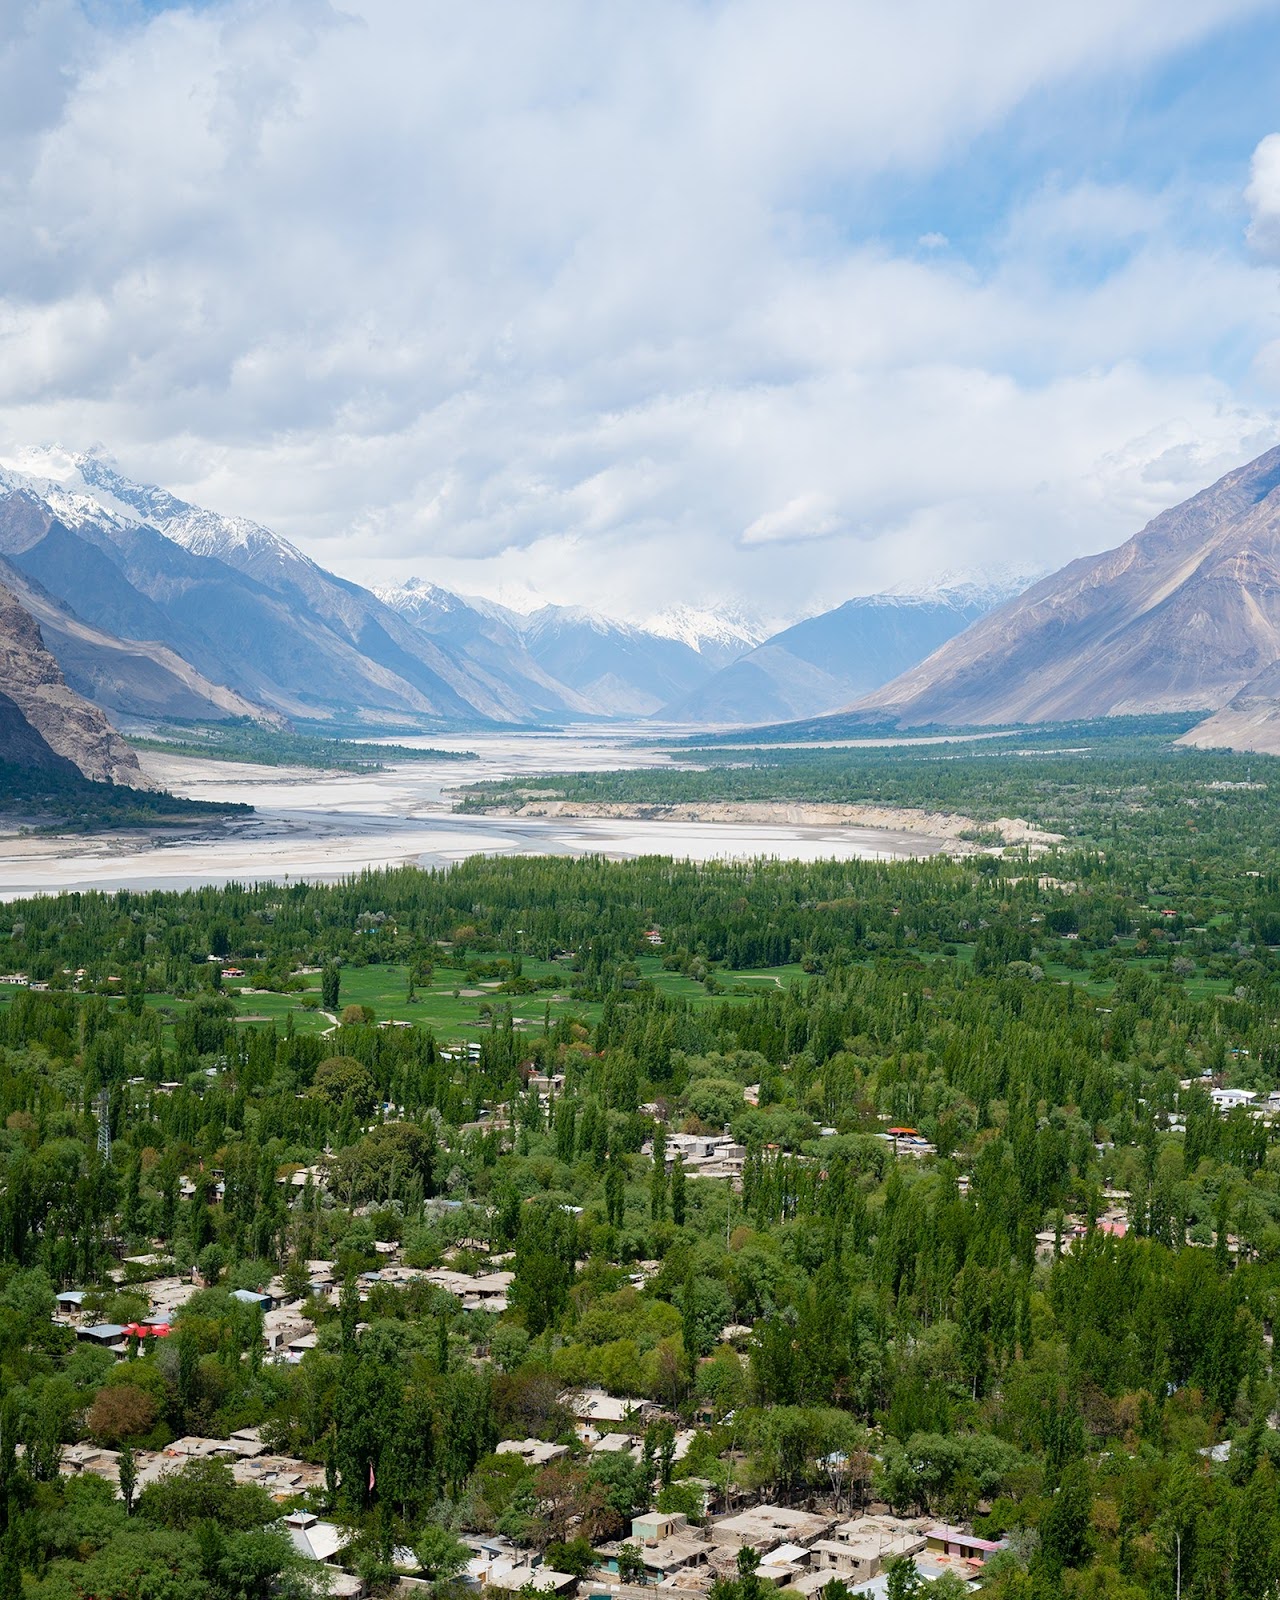 Overlooking Shigar village from Bodi Shagaran, a field of ancient petroglyphs and one of the UOBS field school sites. Photo by David Hansen.